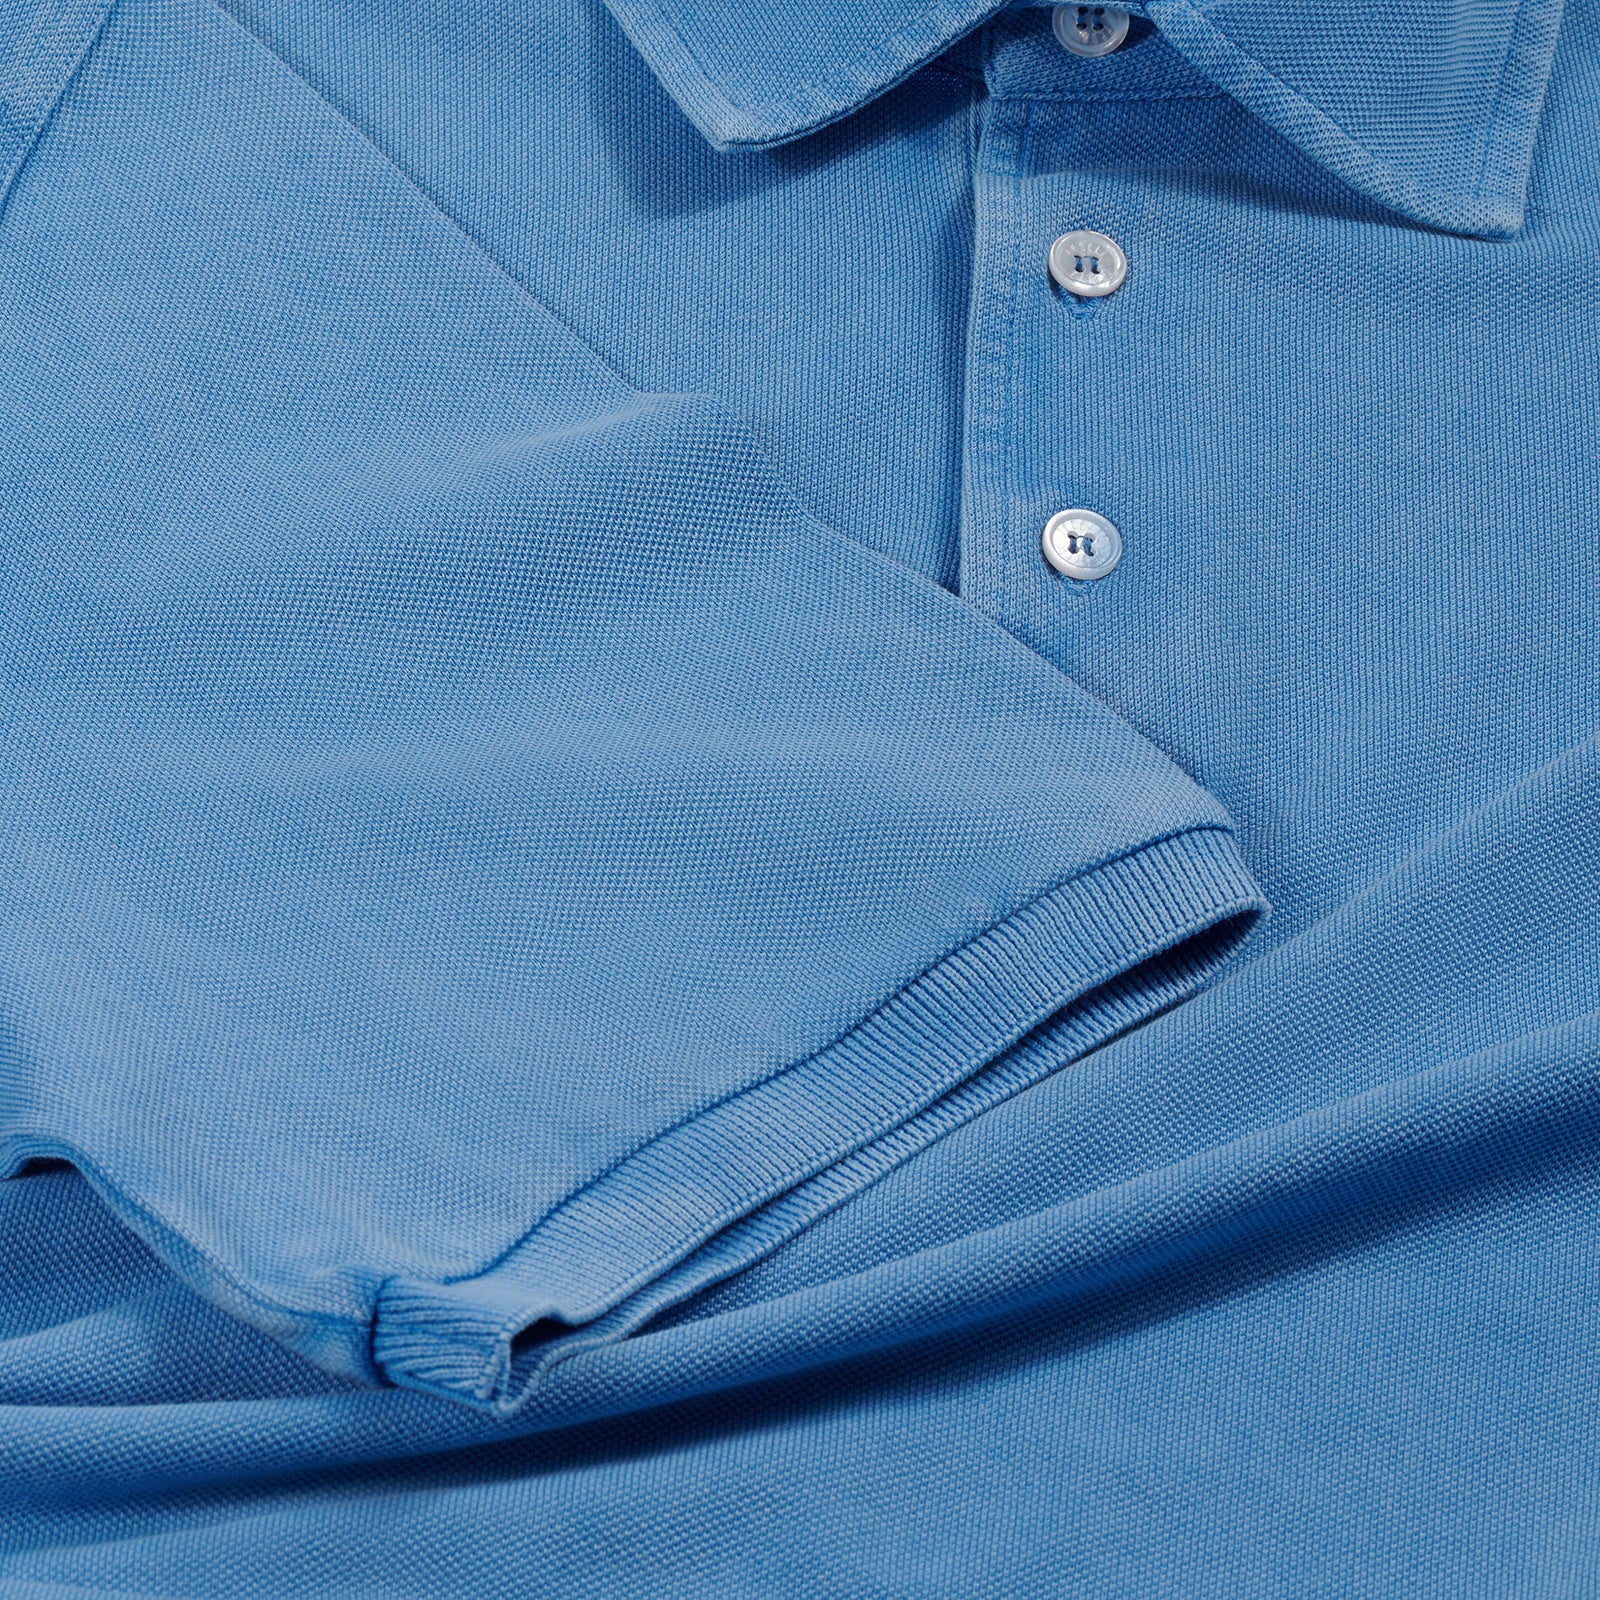 Fedeli Classic Short Sleeve Knitted Piqué Polo Shirt in Sky Blue